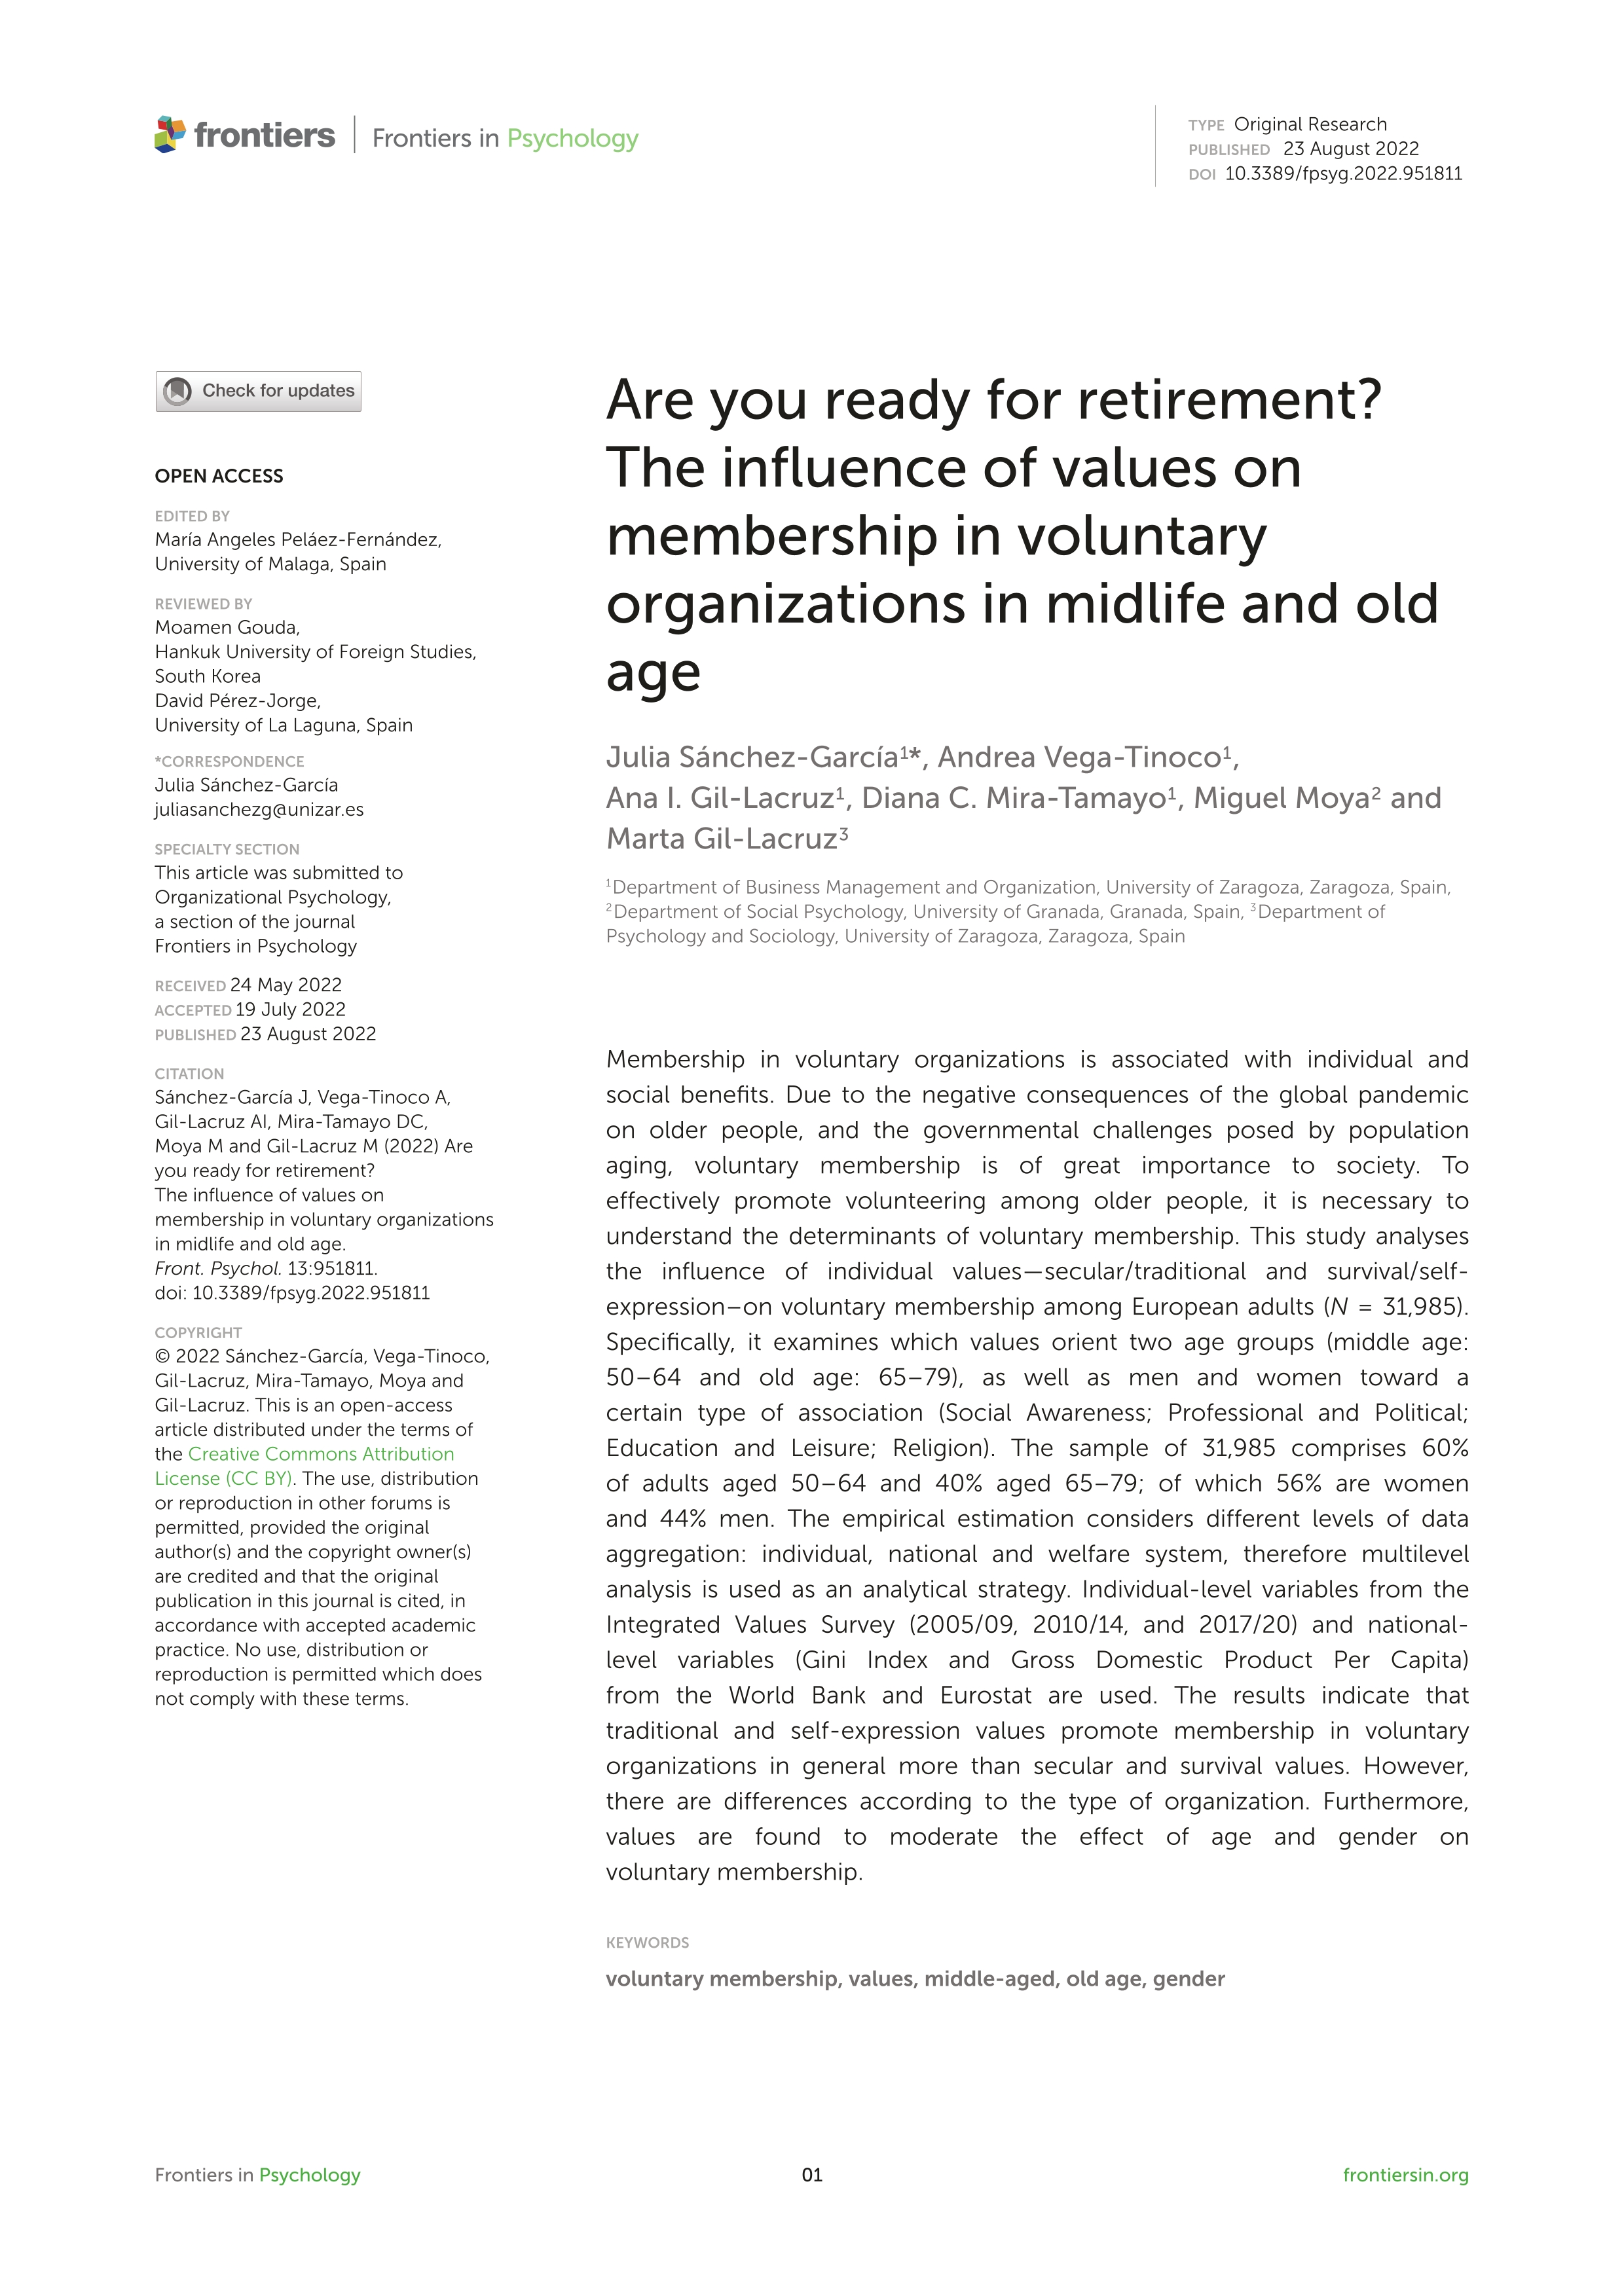 Are you ready for retirement? The influence of values on membership in voluntary organizations in midlife and old age